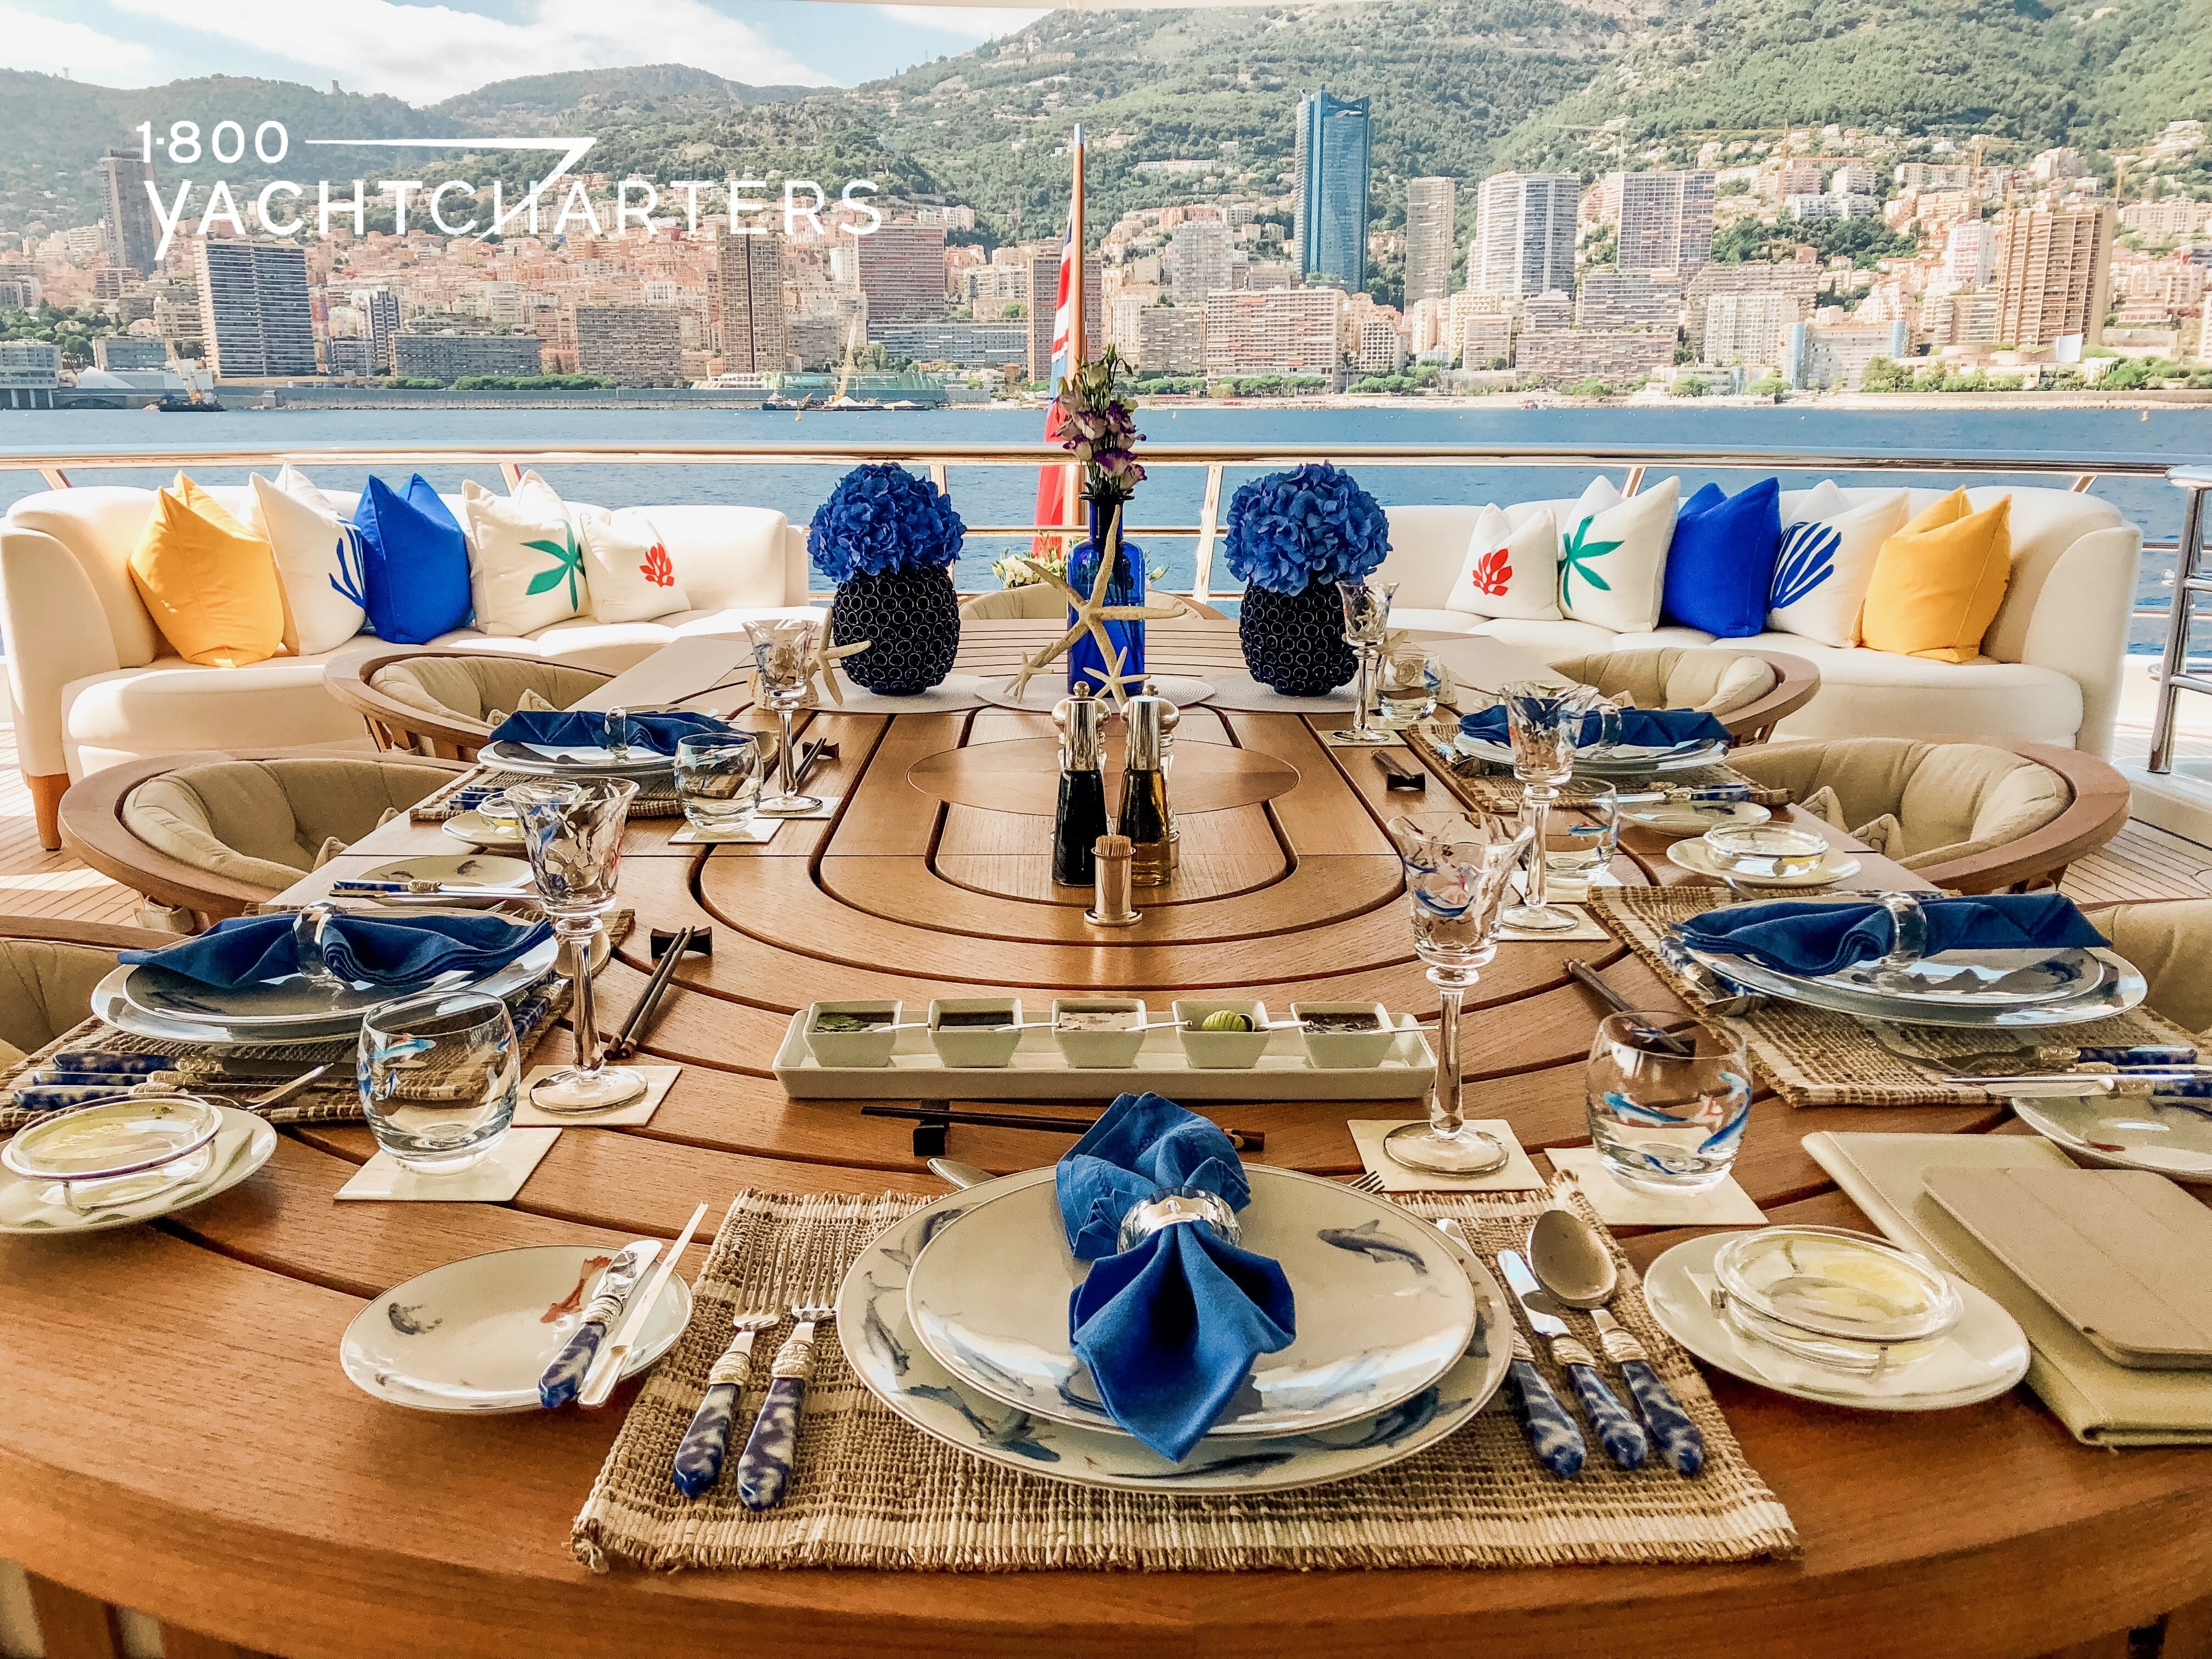 Photo taken from the back entrance of a yacht toward the back of the yacht. The yacht is facing away from a gorgeous Mediterranean cityscape. There is a table in the foreground that is elegantly set. It features blue, white, and beige. It is a large table on the deck of a yacht.